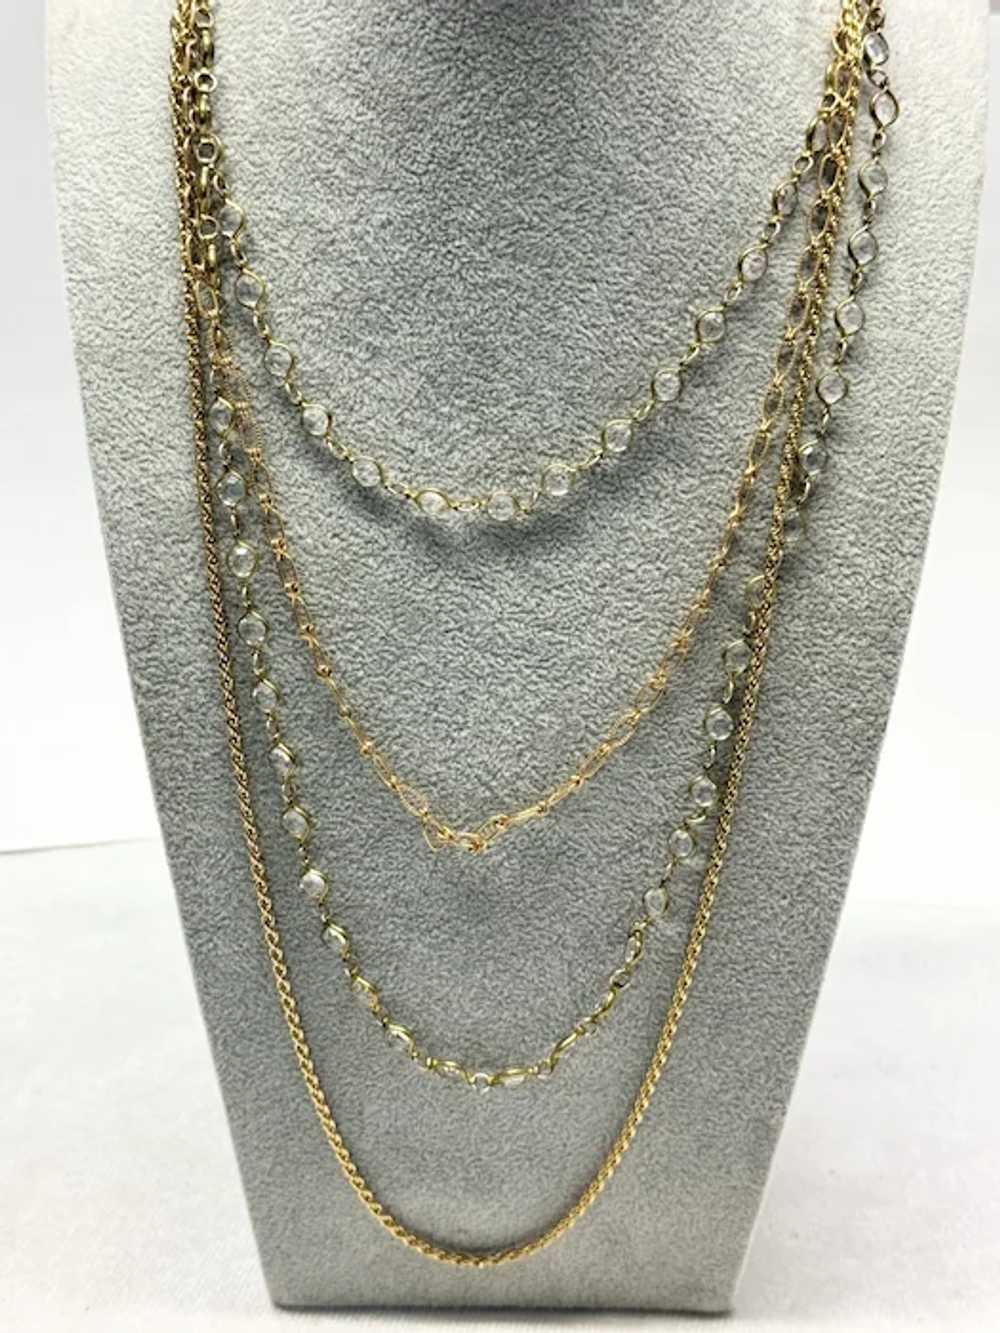 Vintage multi chain crystal necklace - image 5